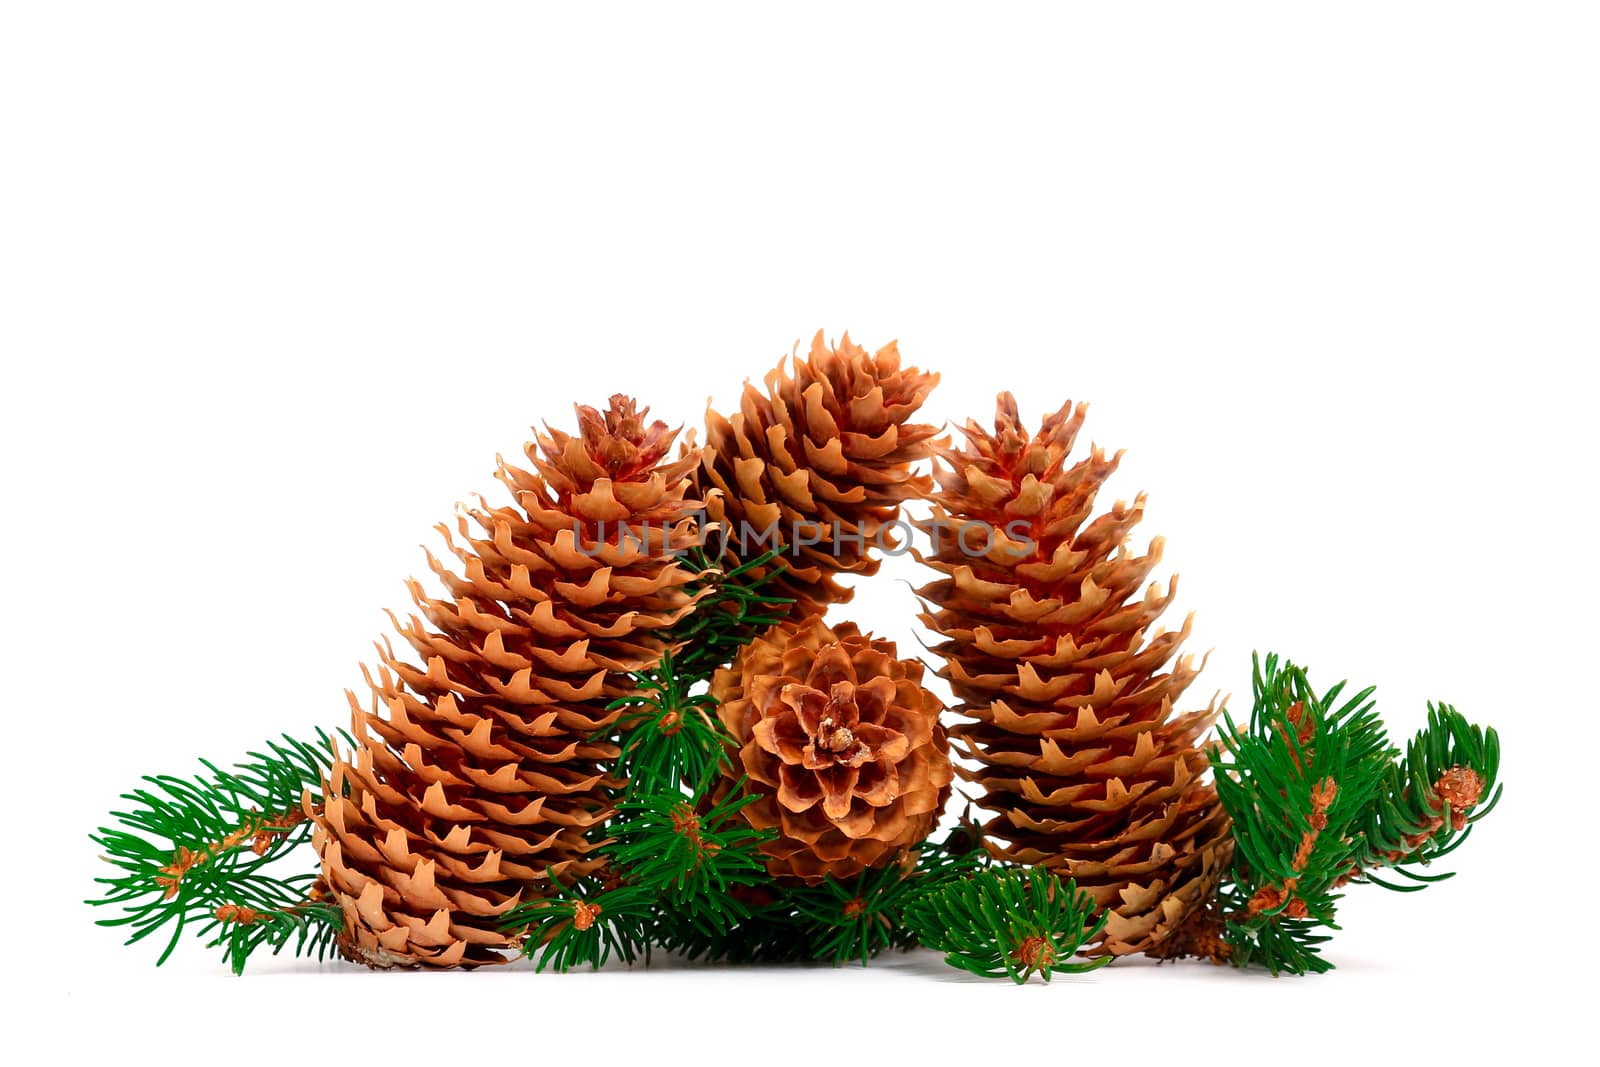 Four pine cones and branches in a scenic Christmas decoration by shoricelu